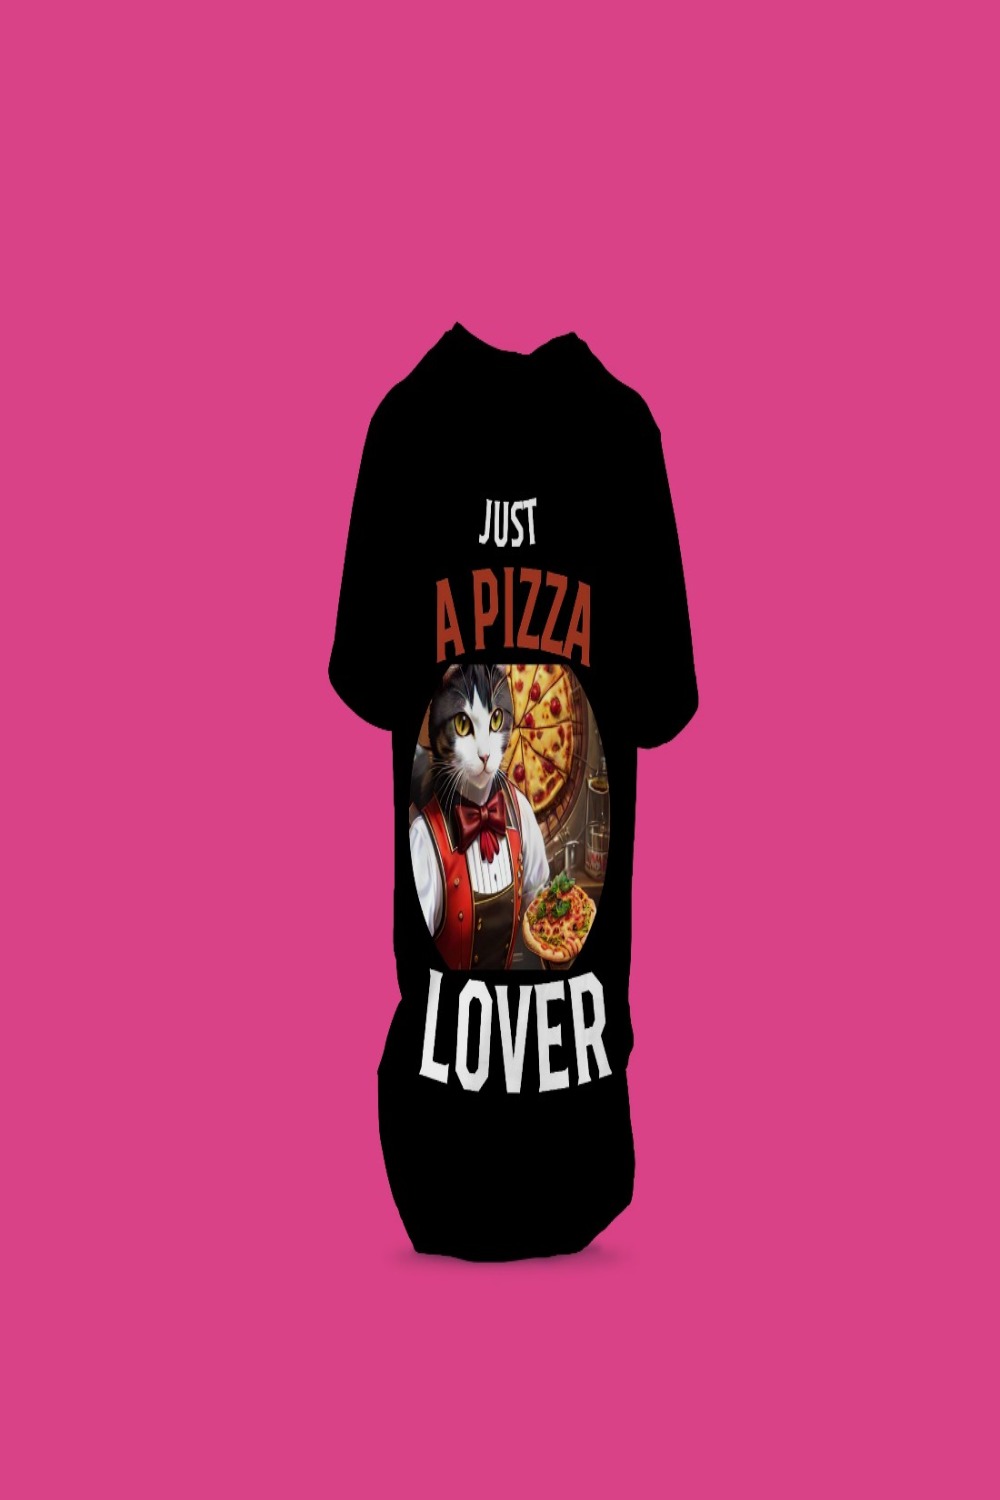 Just A pizza lover - T-shirt pinterest preview image.